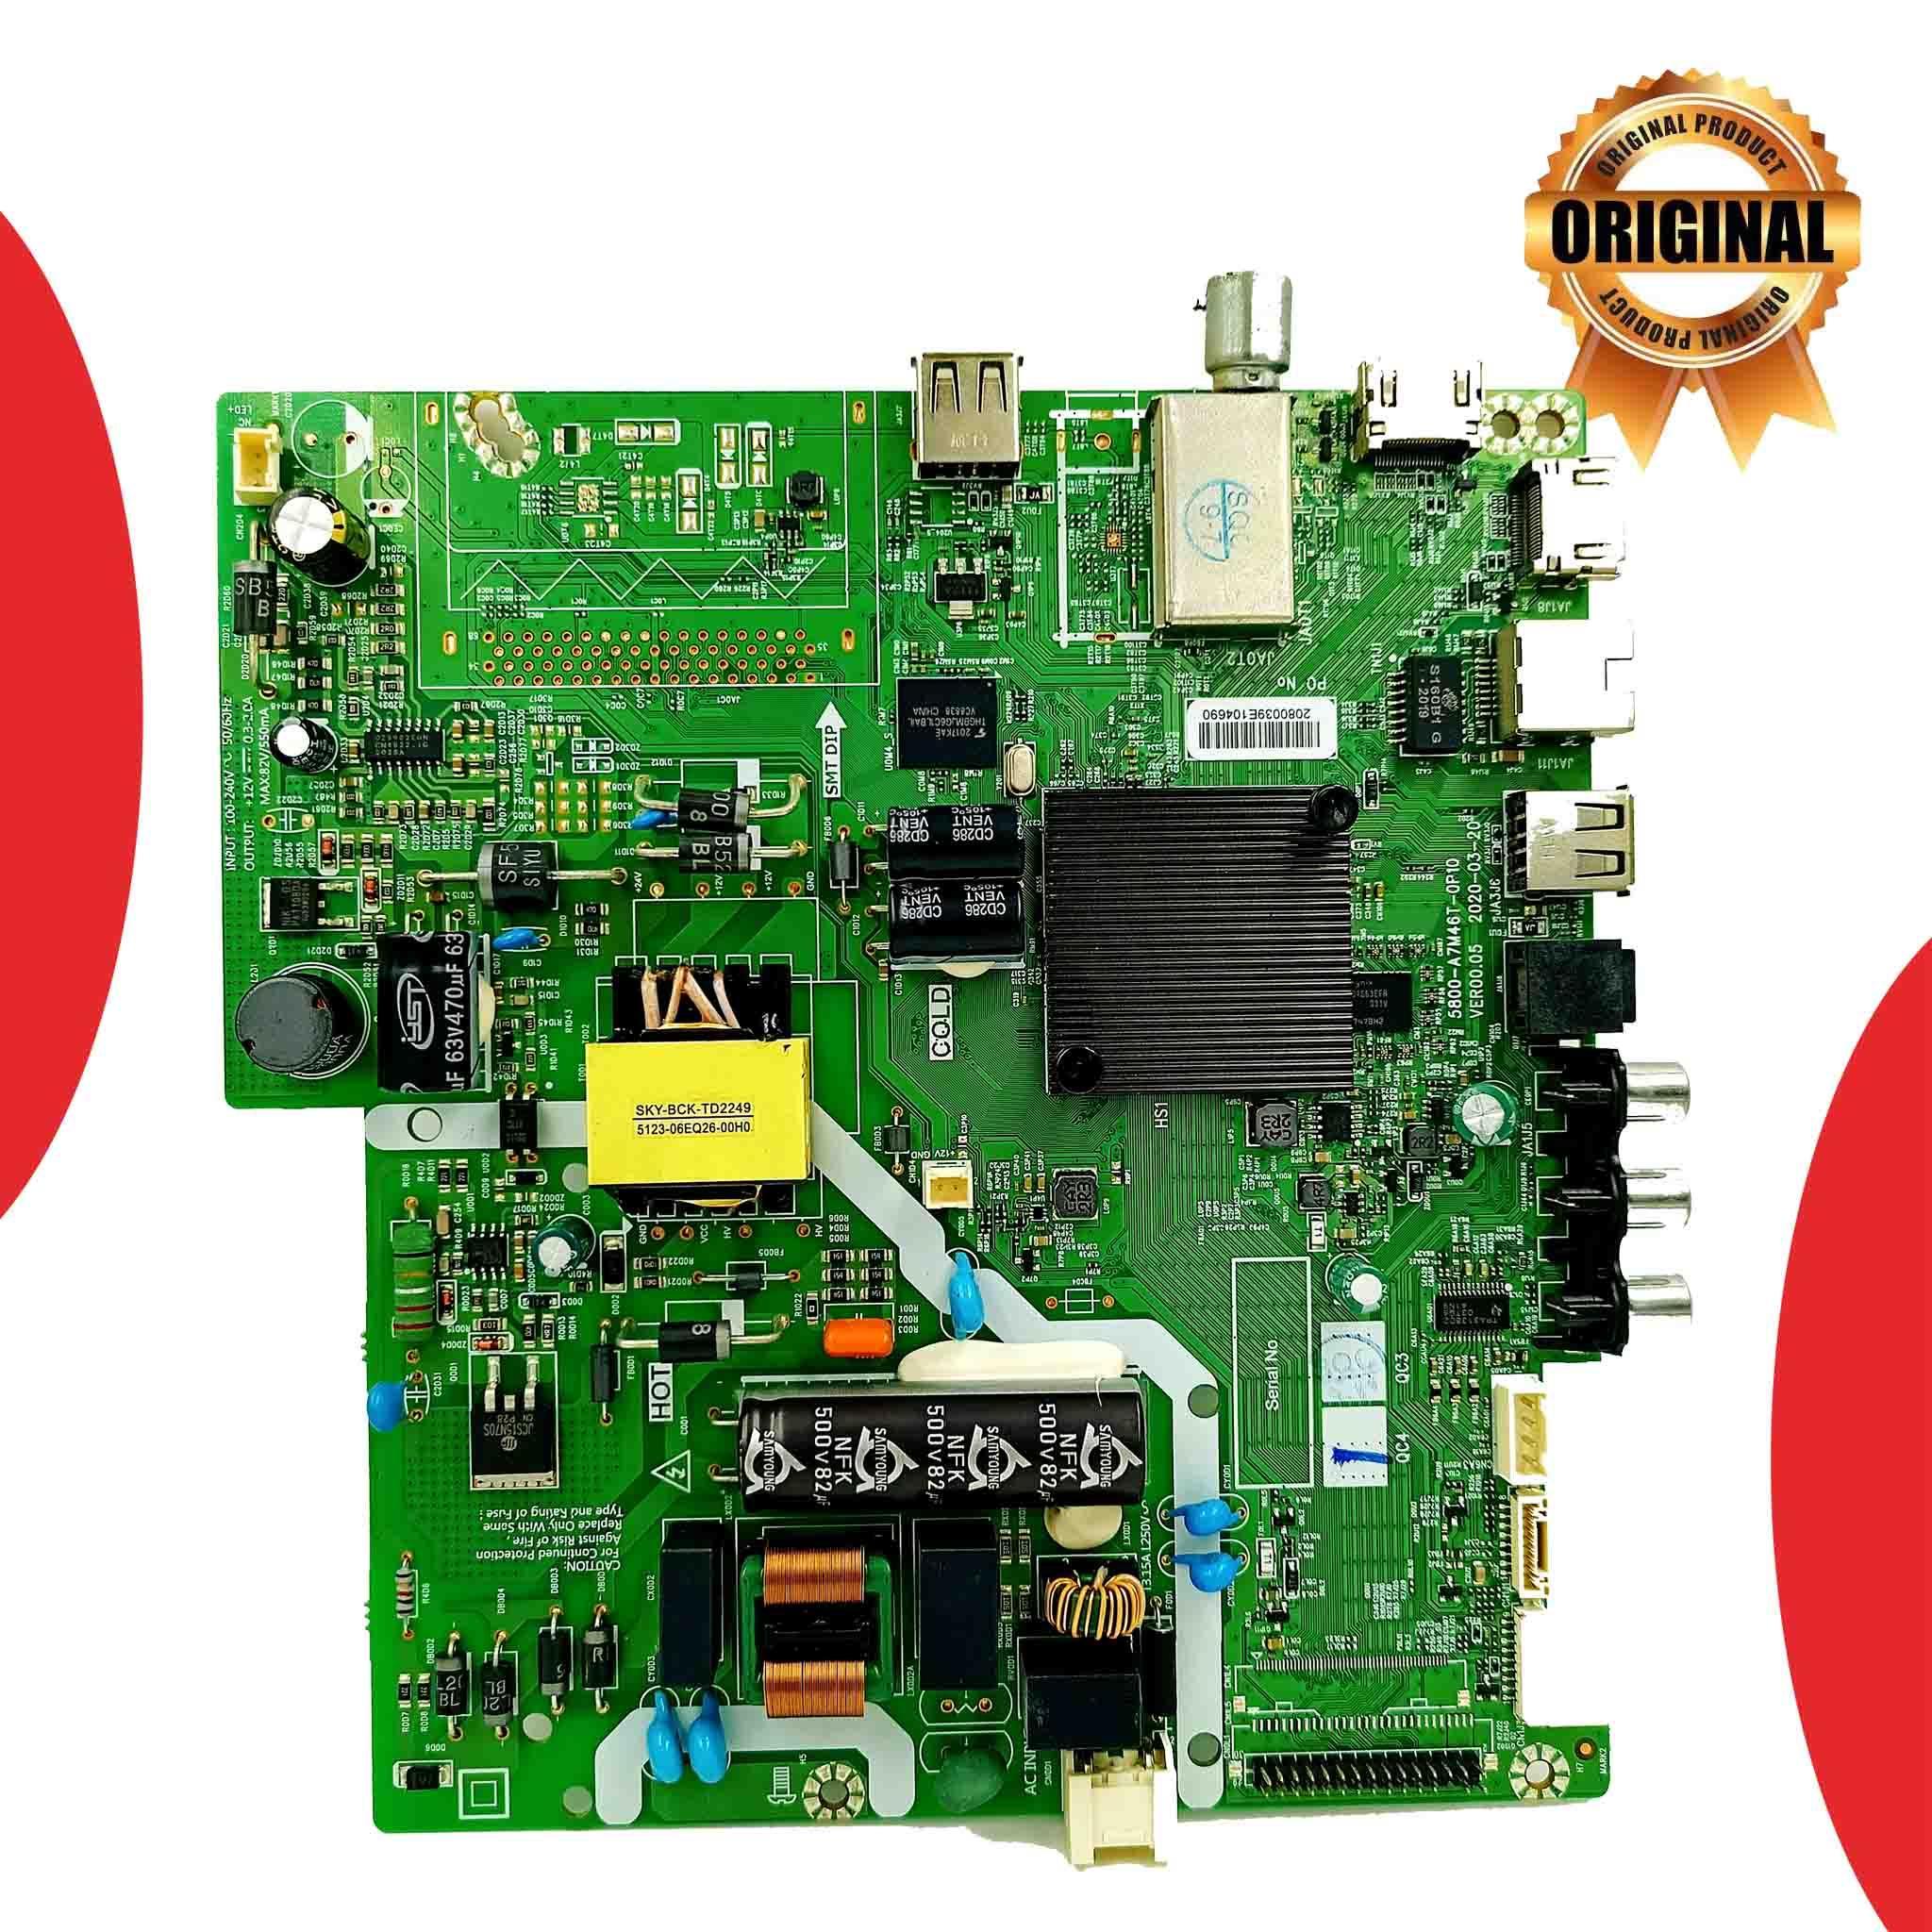 Model 32HAOA00 OnePlus LED TV Motherboard - Great Bharat Electronics